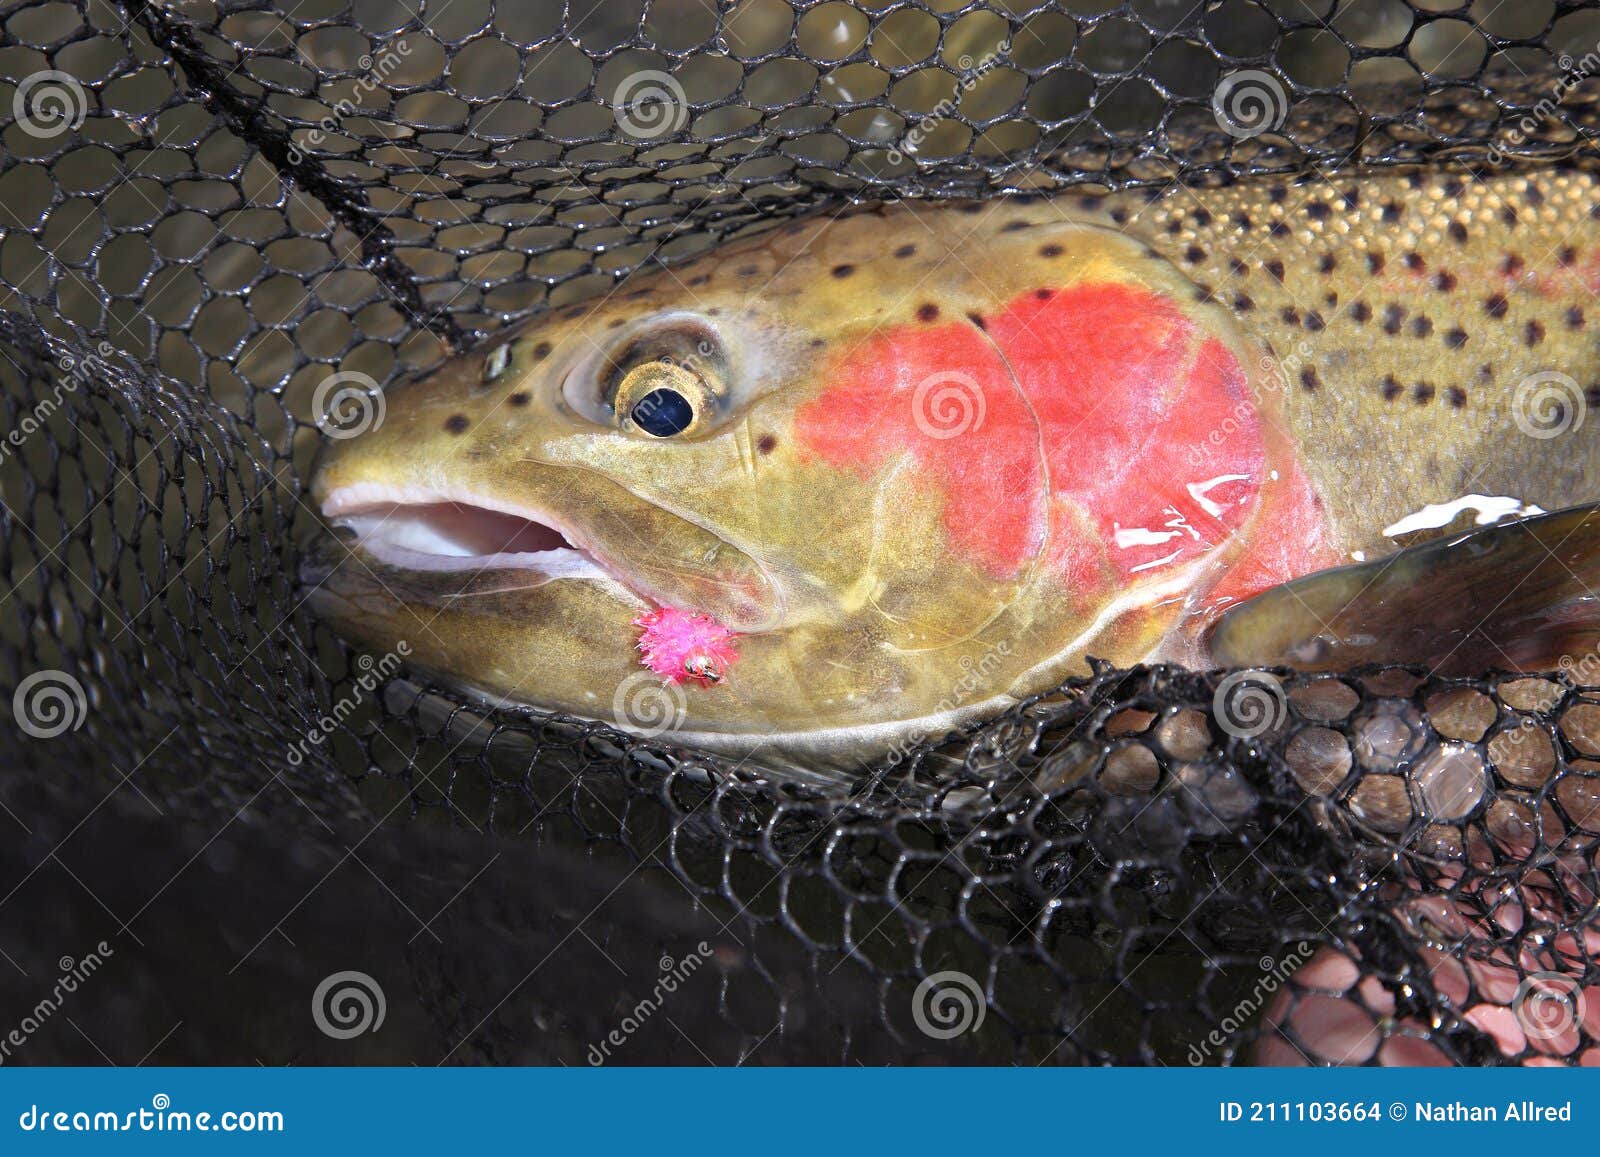 Steelhead Trout in Net with Fly in Mouth Stock Photo - Image of